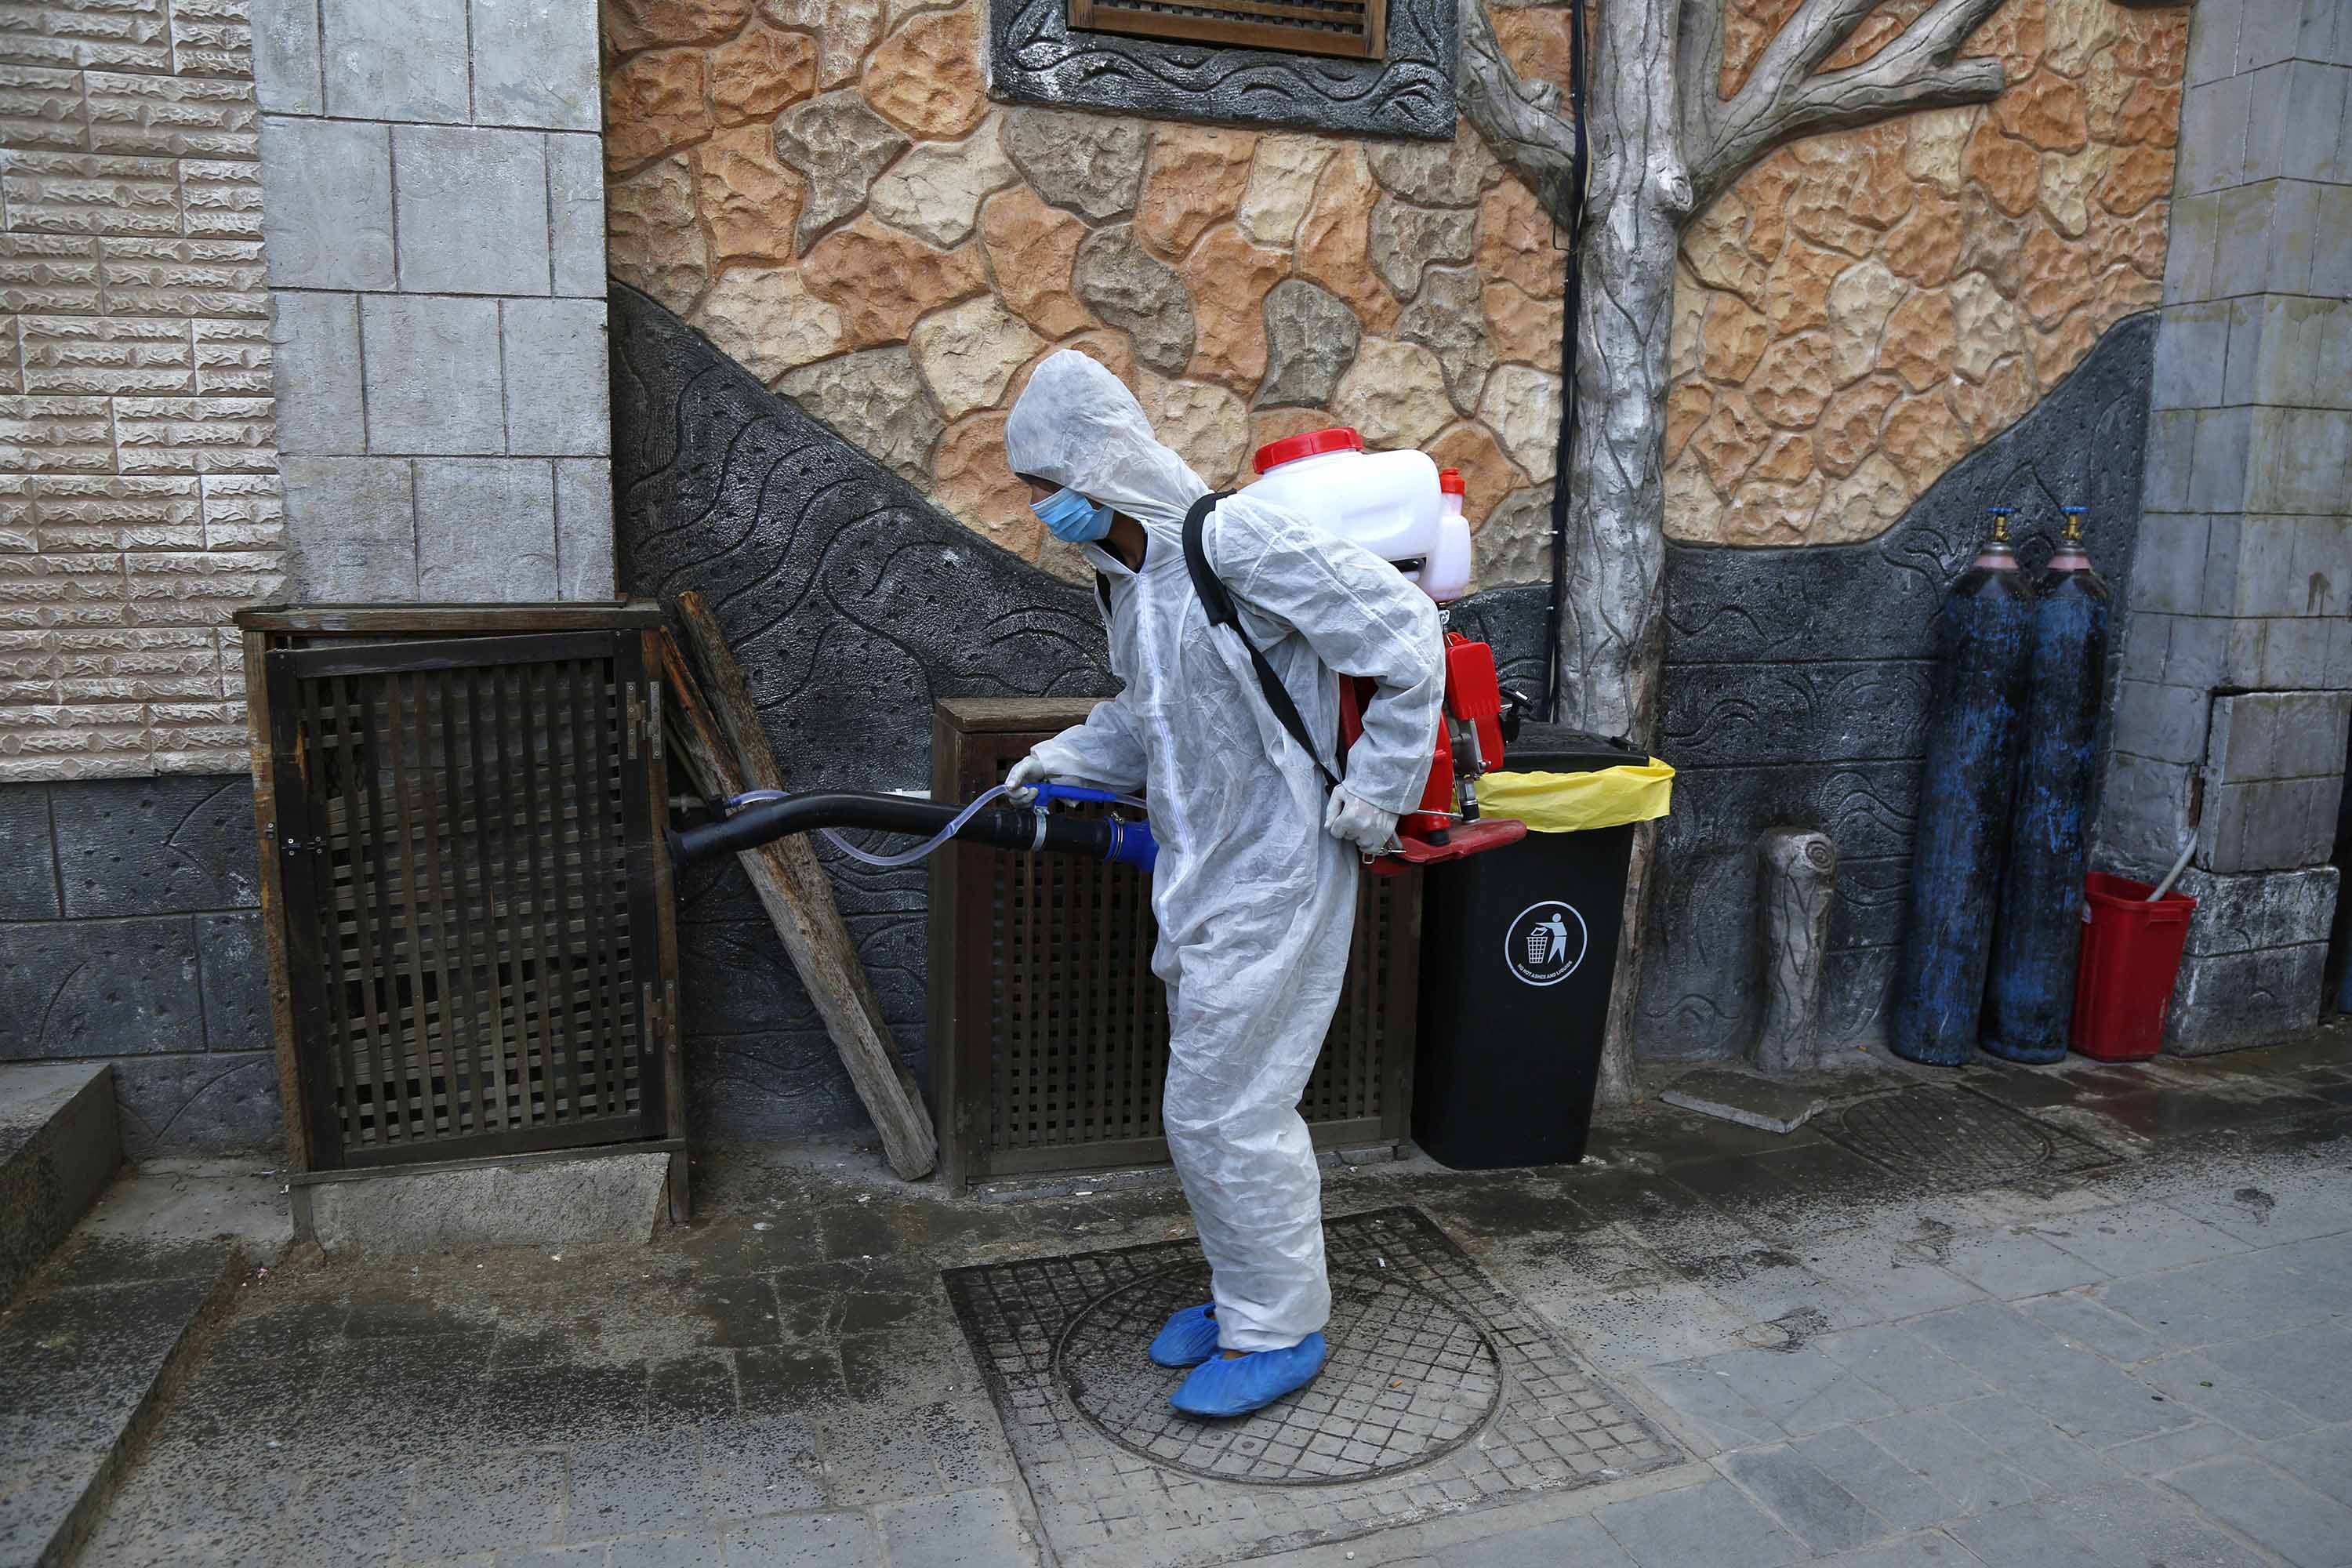 A member of a medical team sprays disinfectant in Sanaa, Yemen, on April 6.